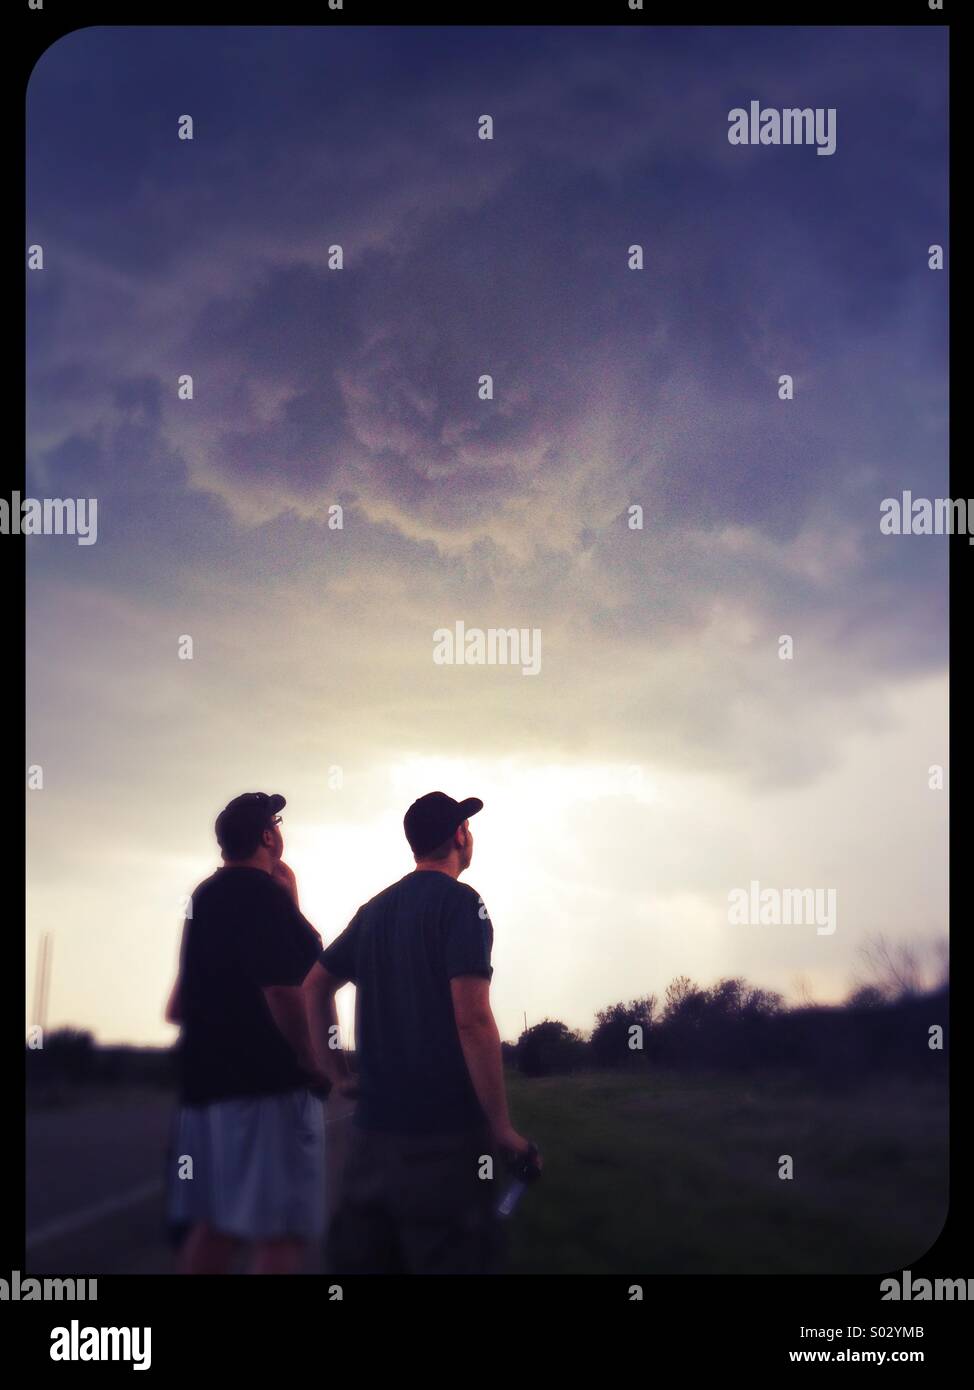 People looking up in the sky at a large storm cloud. Stock Photo